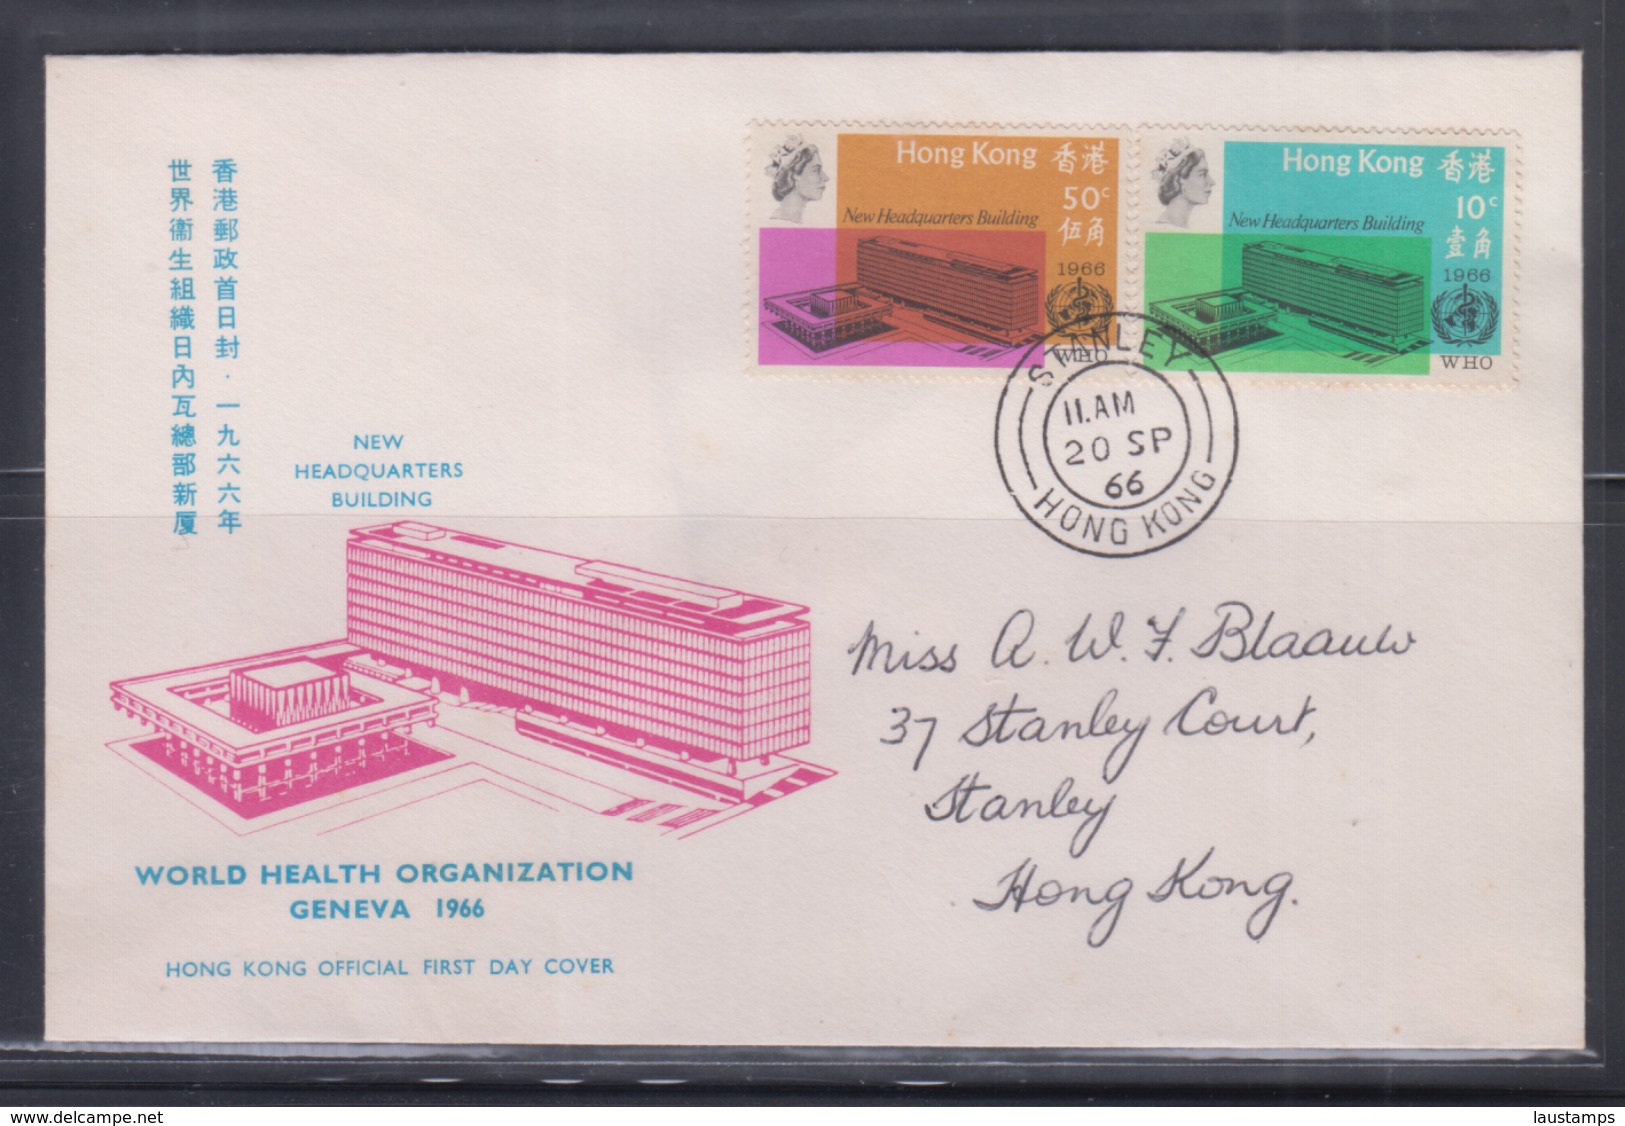 Hong Kong 1966 WHO New Headquaters Building Addressed FDC - FDC